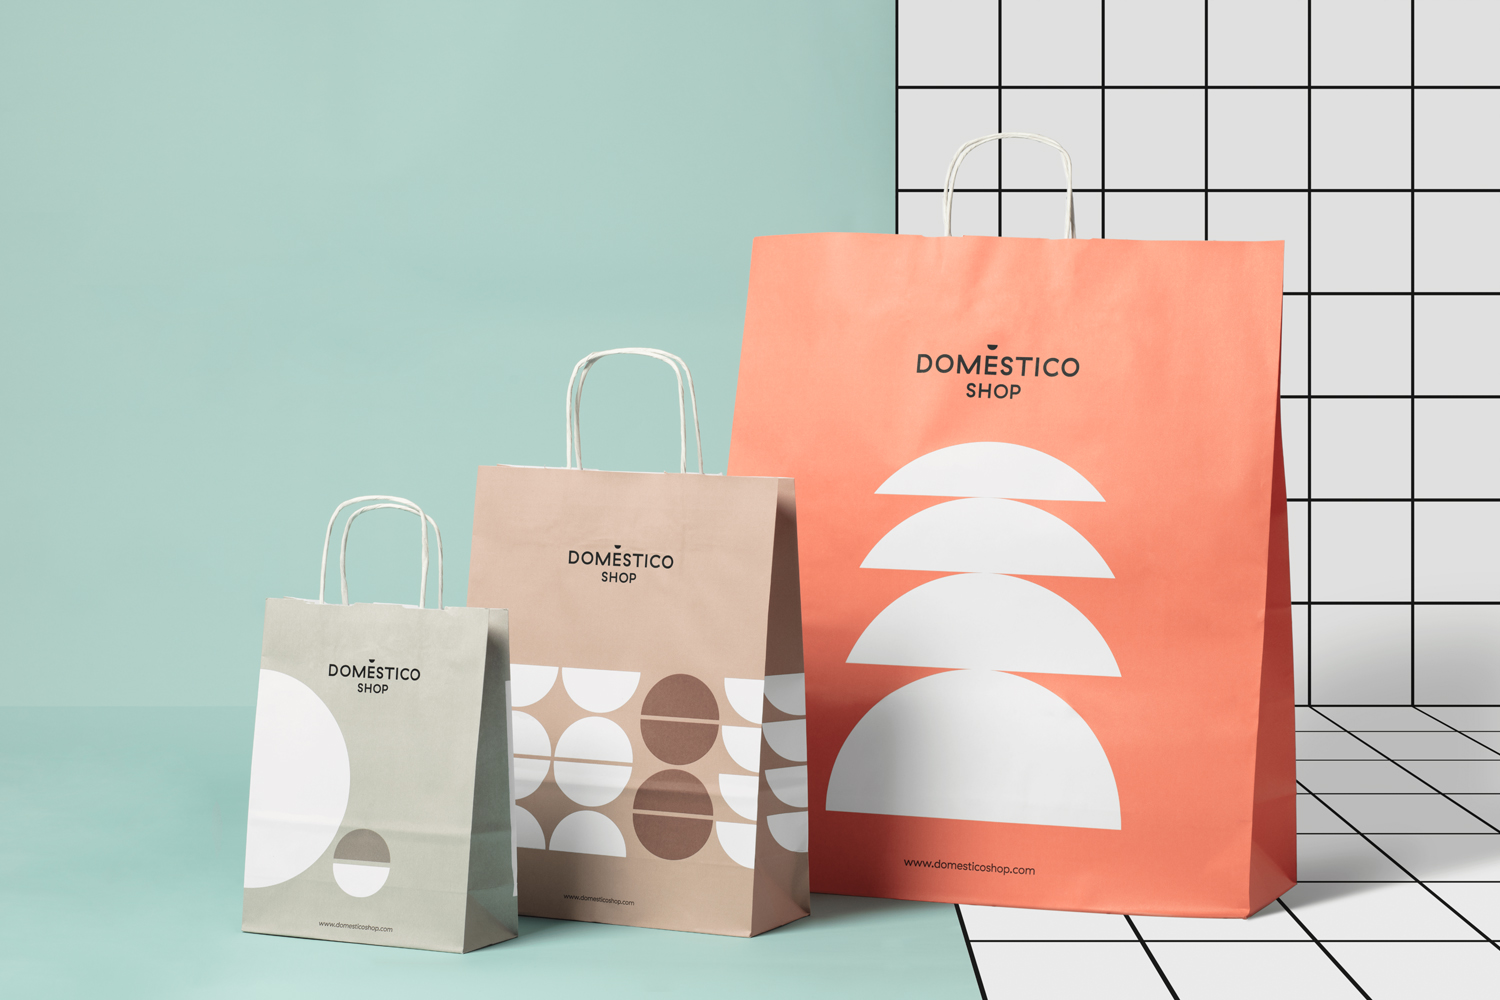 New graphic identity and bags designed by Mucho for Spanish furniture retailer DomésticoShop